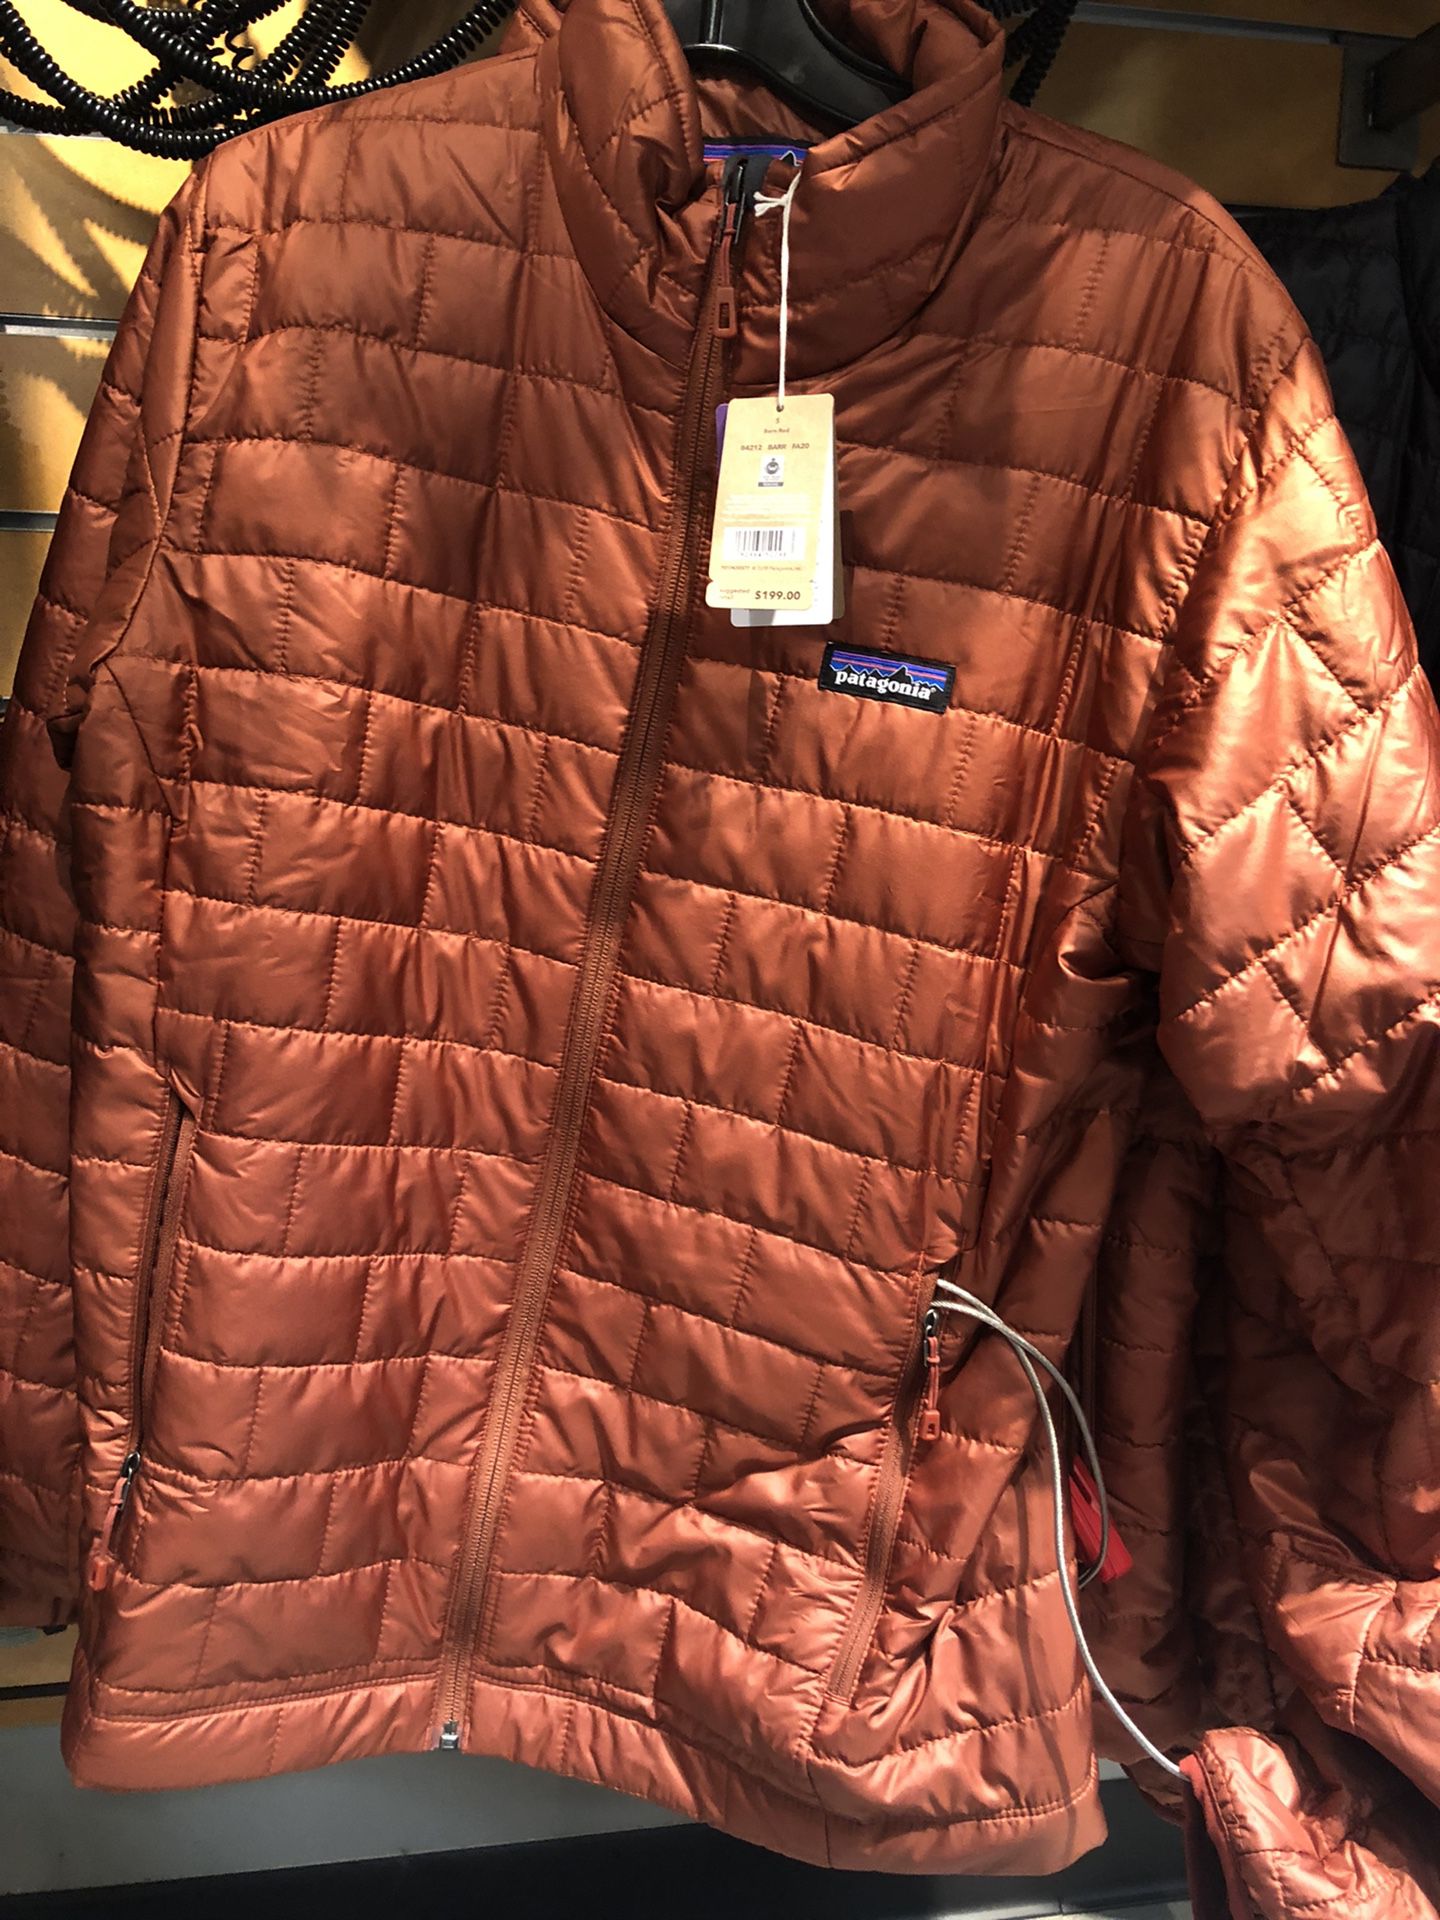 Patagonia Size Small Puffy, Vest Also available $75, but Both $150